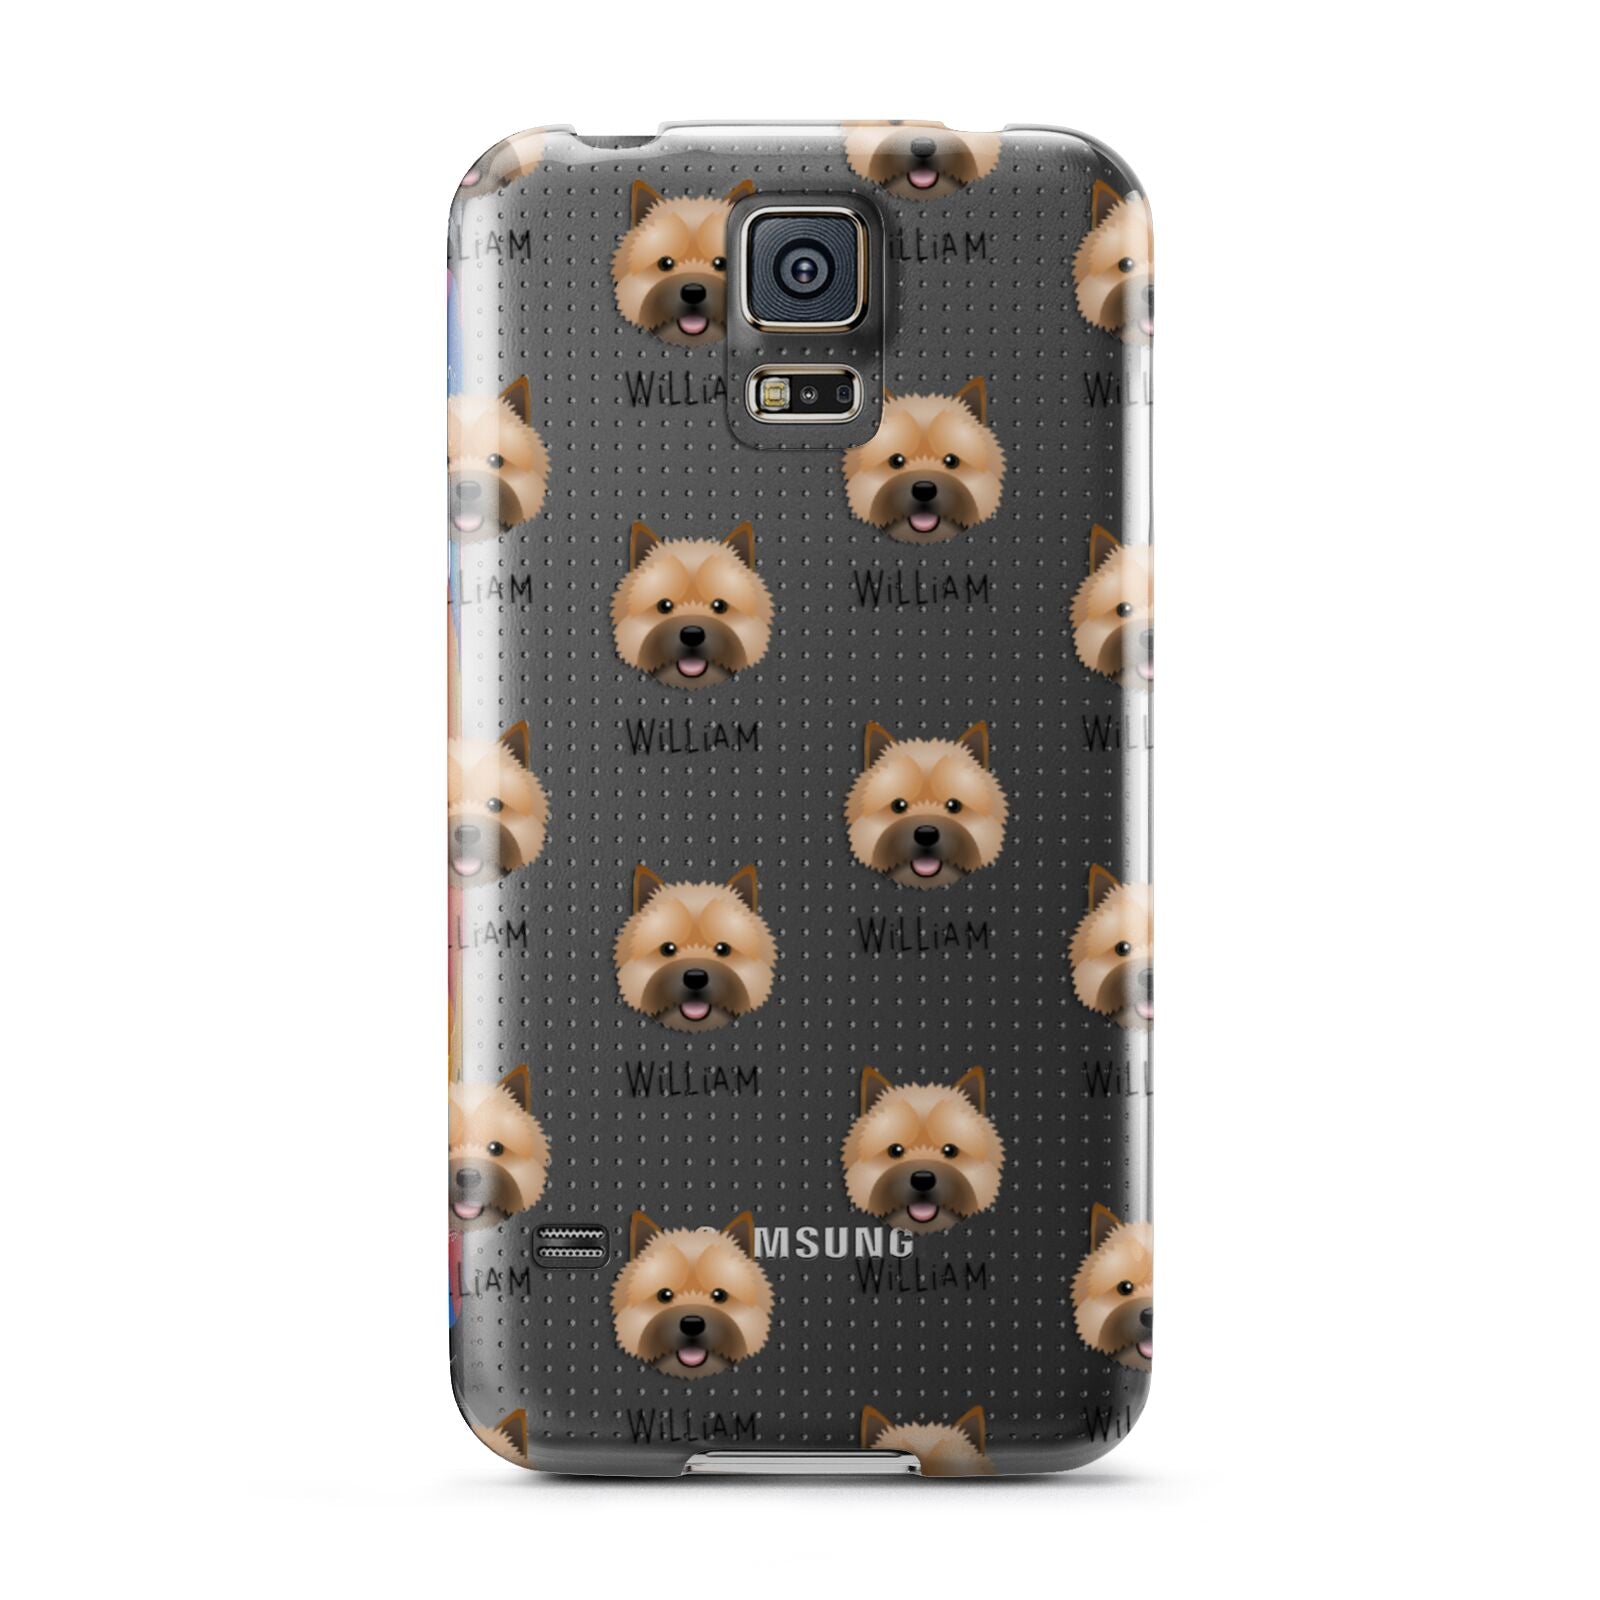 Norwich Terrier Icon with Name Samsung Galaxy S5 Case